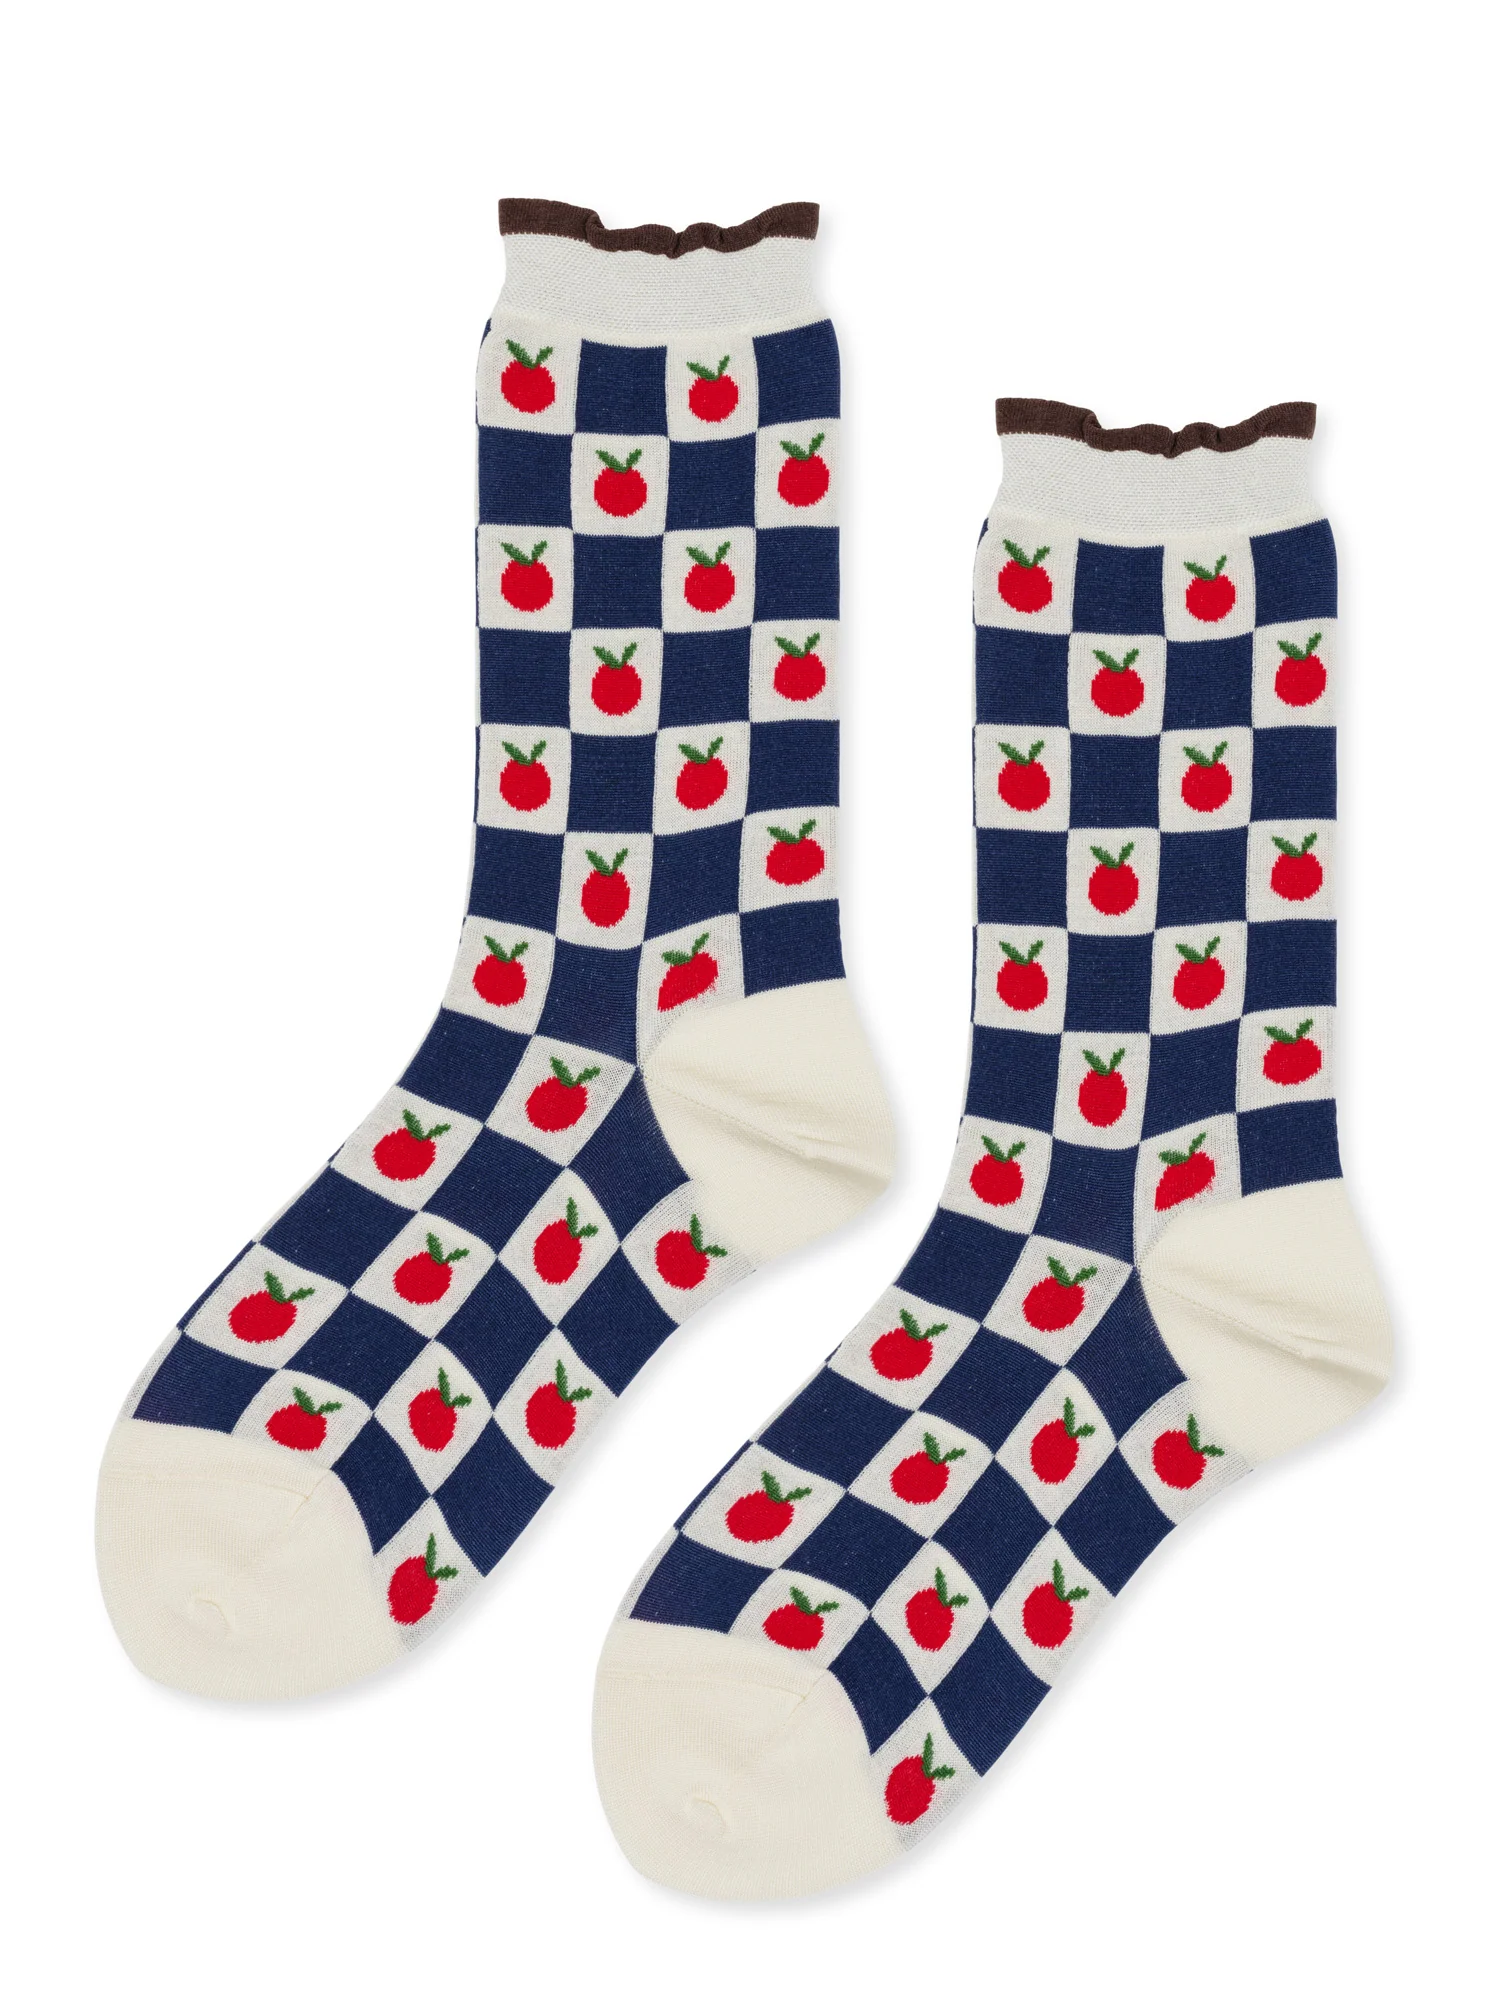 pair of socks with a checkered pattern. Inside the white squares are small individual tomatoes. 